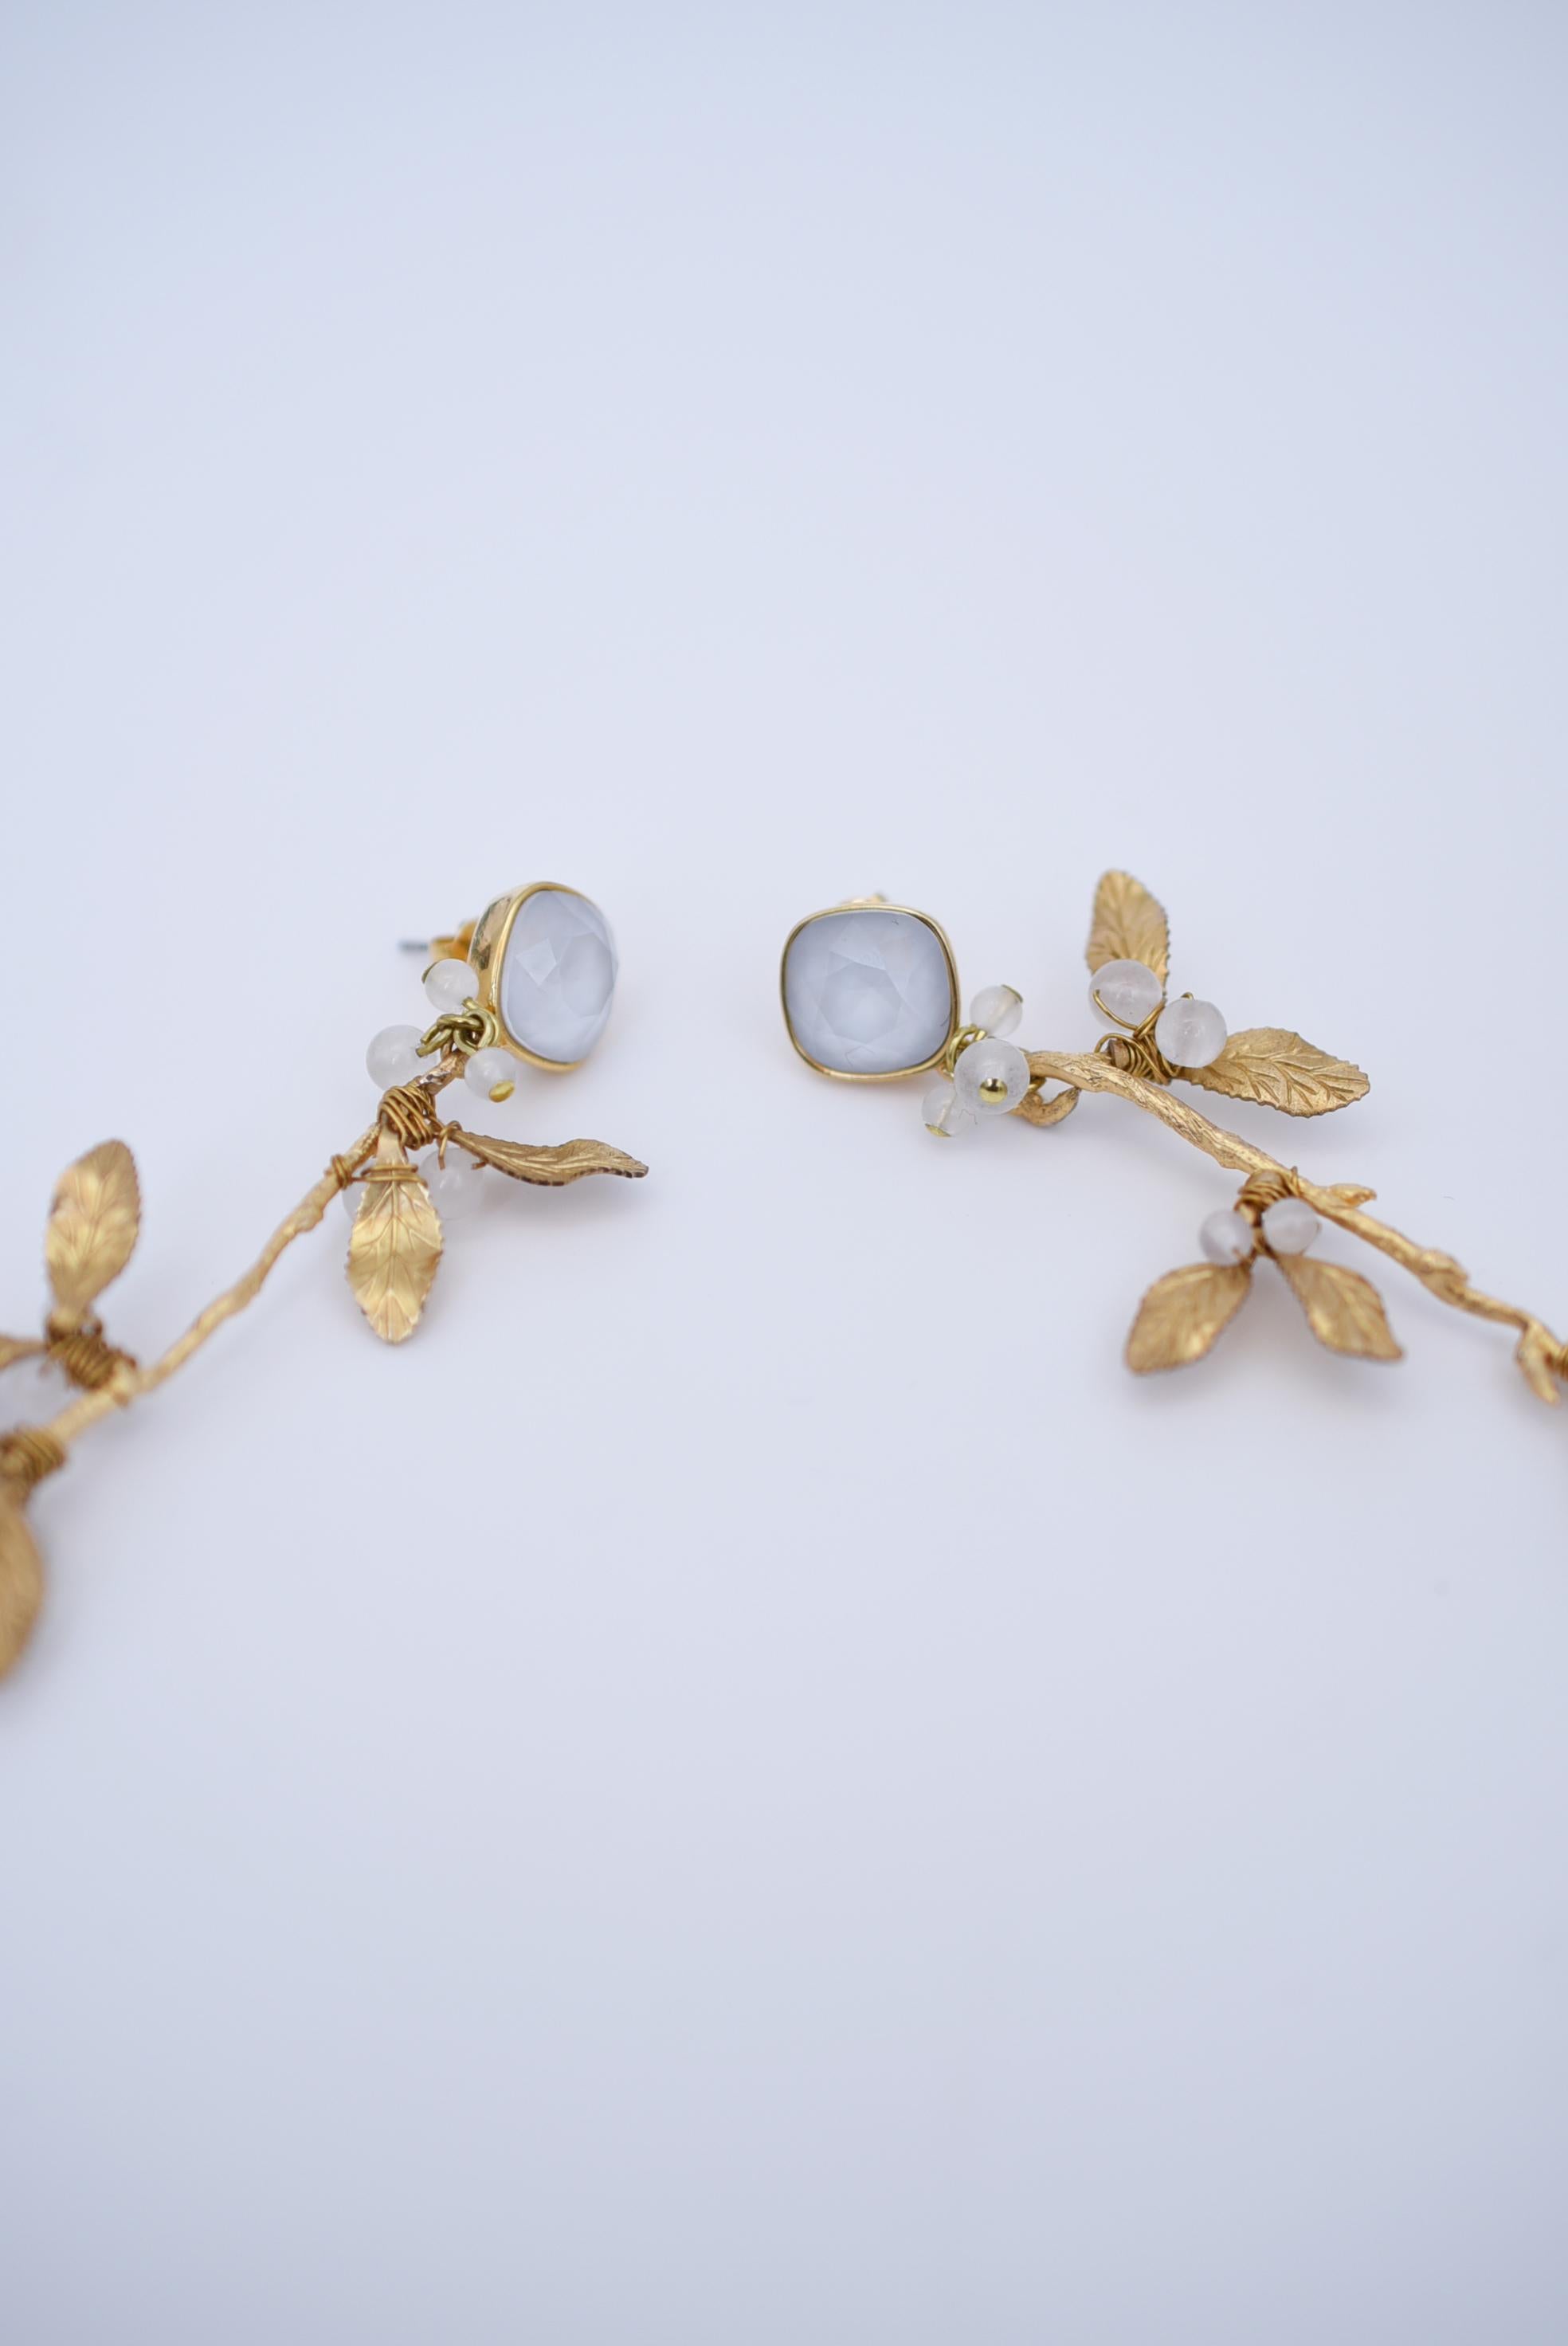 material:1970’s American vintage parts,swarovski,brass,white jade,stainless
size:length 7cm

It looks delicate and has a strong presence due to its large size.
The white Swarovski and white jade, which look like snow on mistletoe, sparkle in the